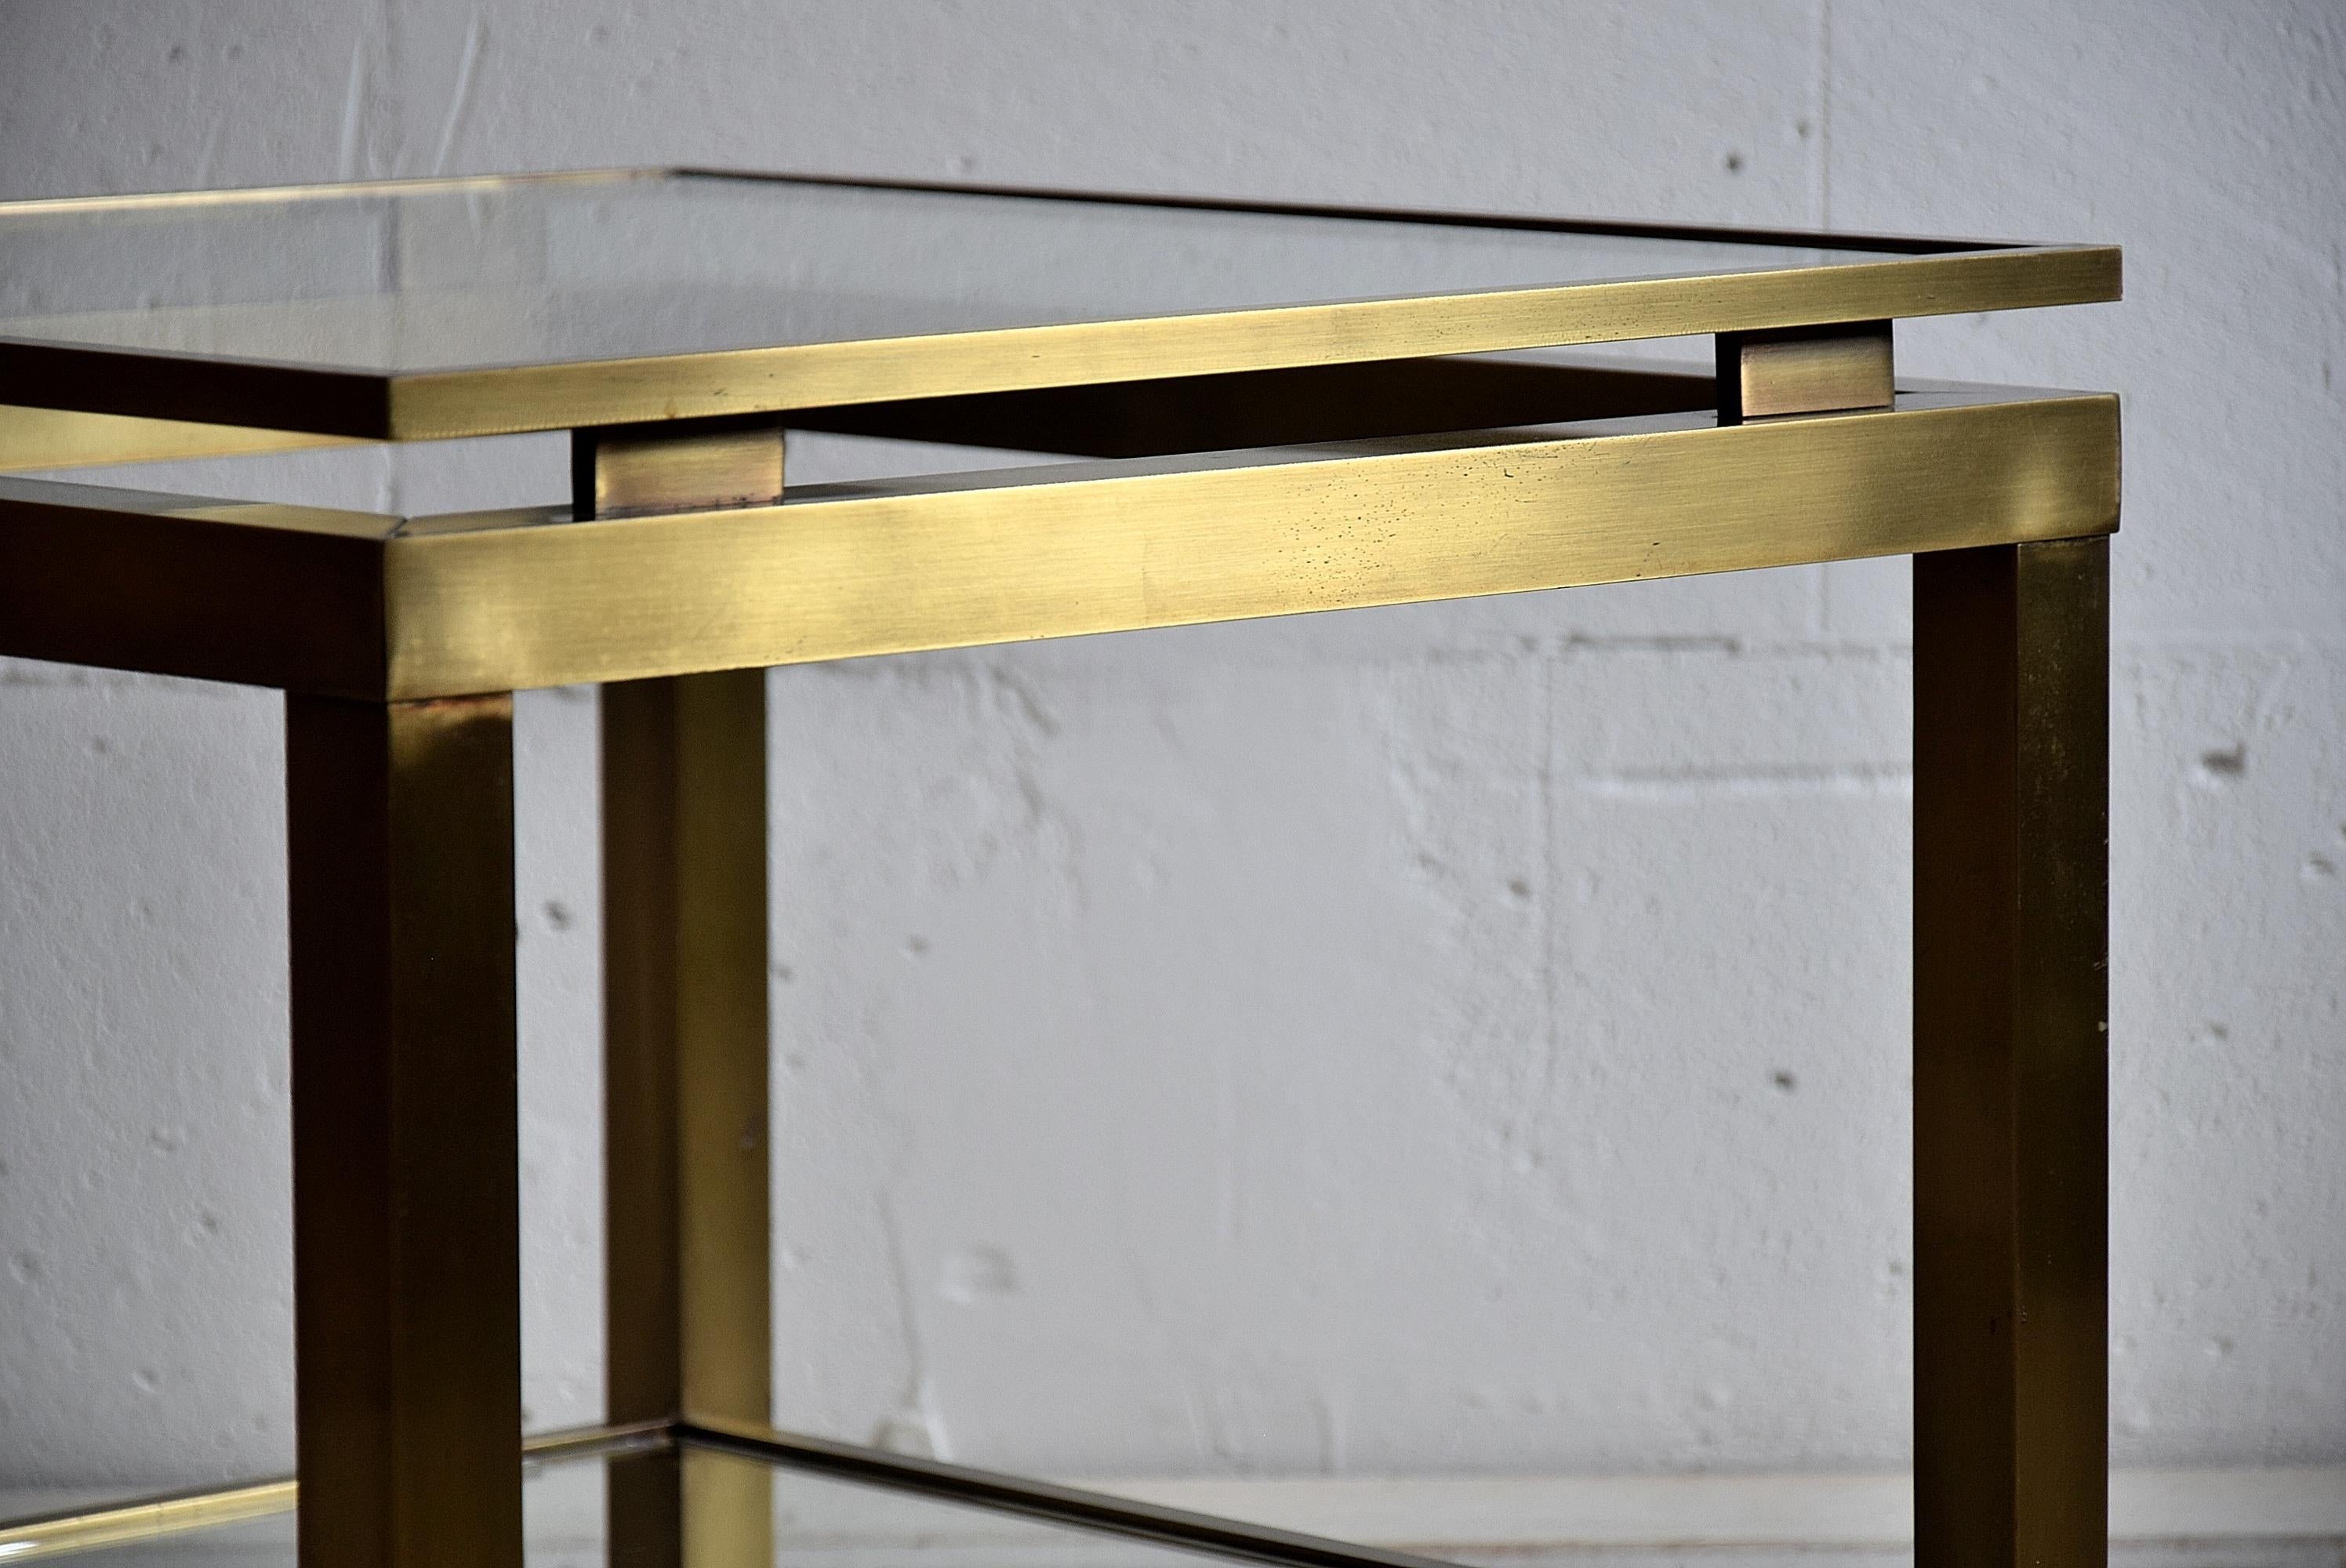 Brass side table by Maison Jansen. Stylish Mid-Century Modern two-tier coffee table by Maison Jansen.
This sophisticated piece is in excellent condition.

Measurements: D 50.5 x W 50.5 x H 46 cm.
The table will be shipped overseas in a custom